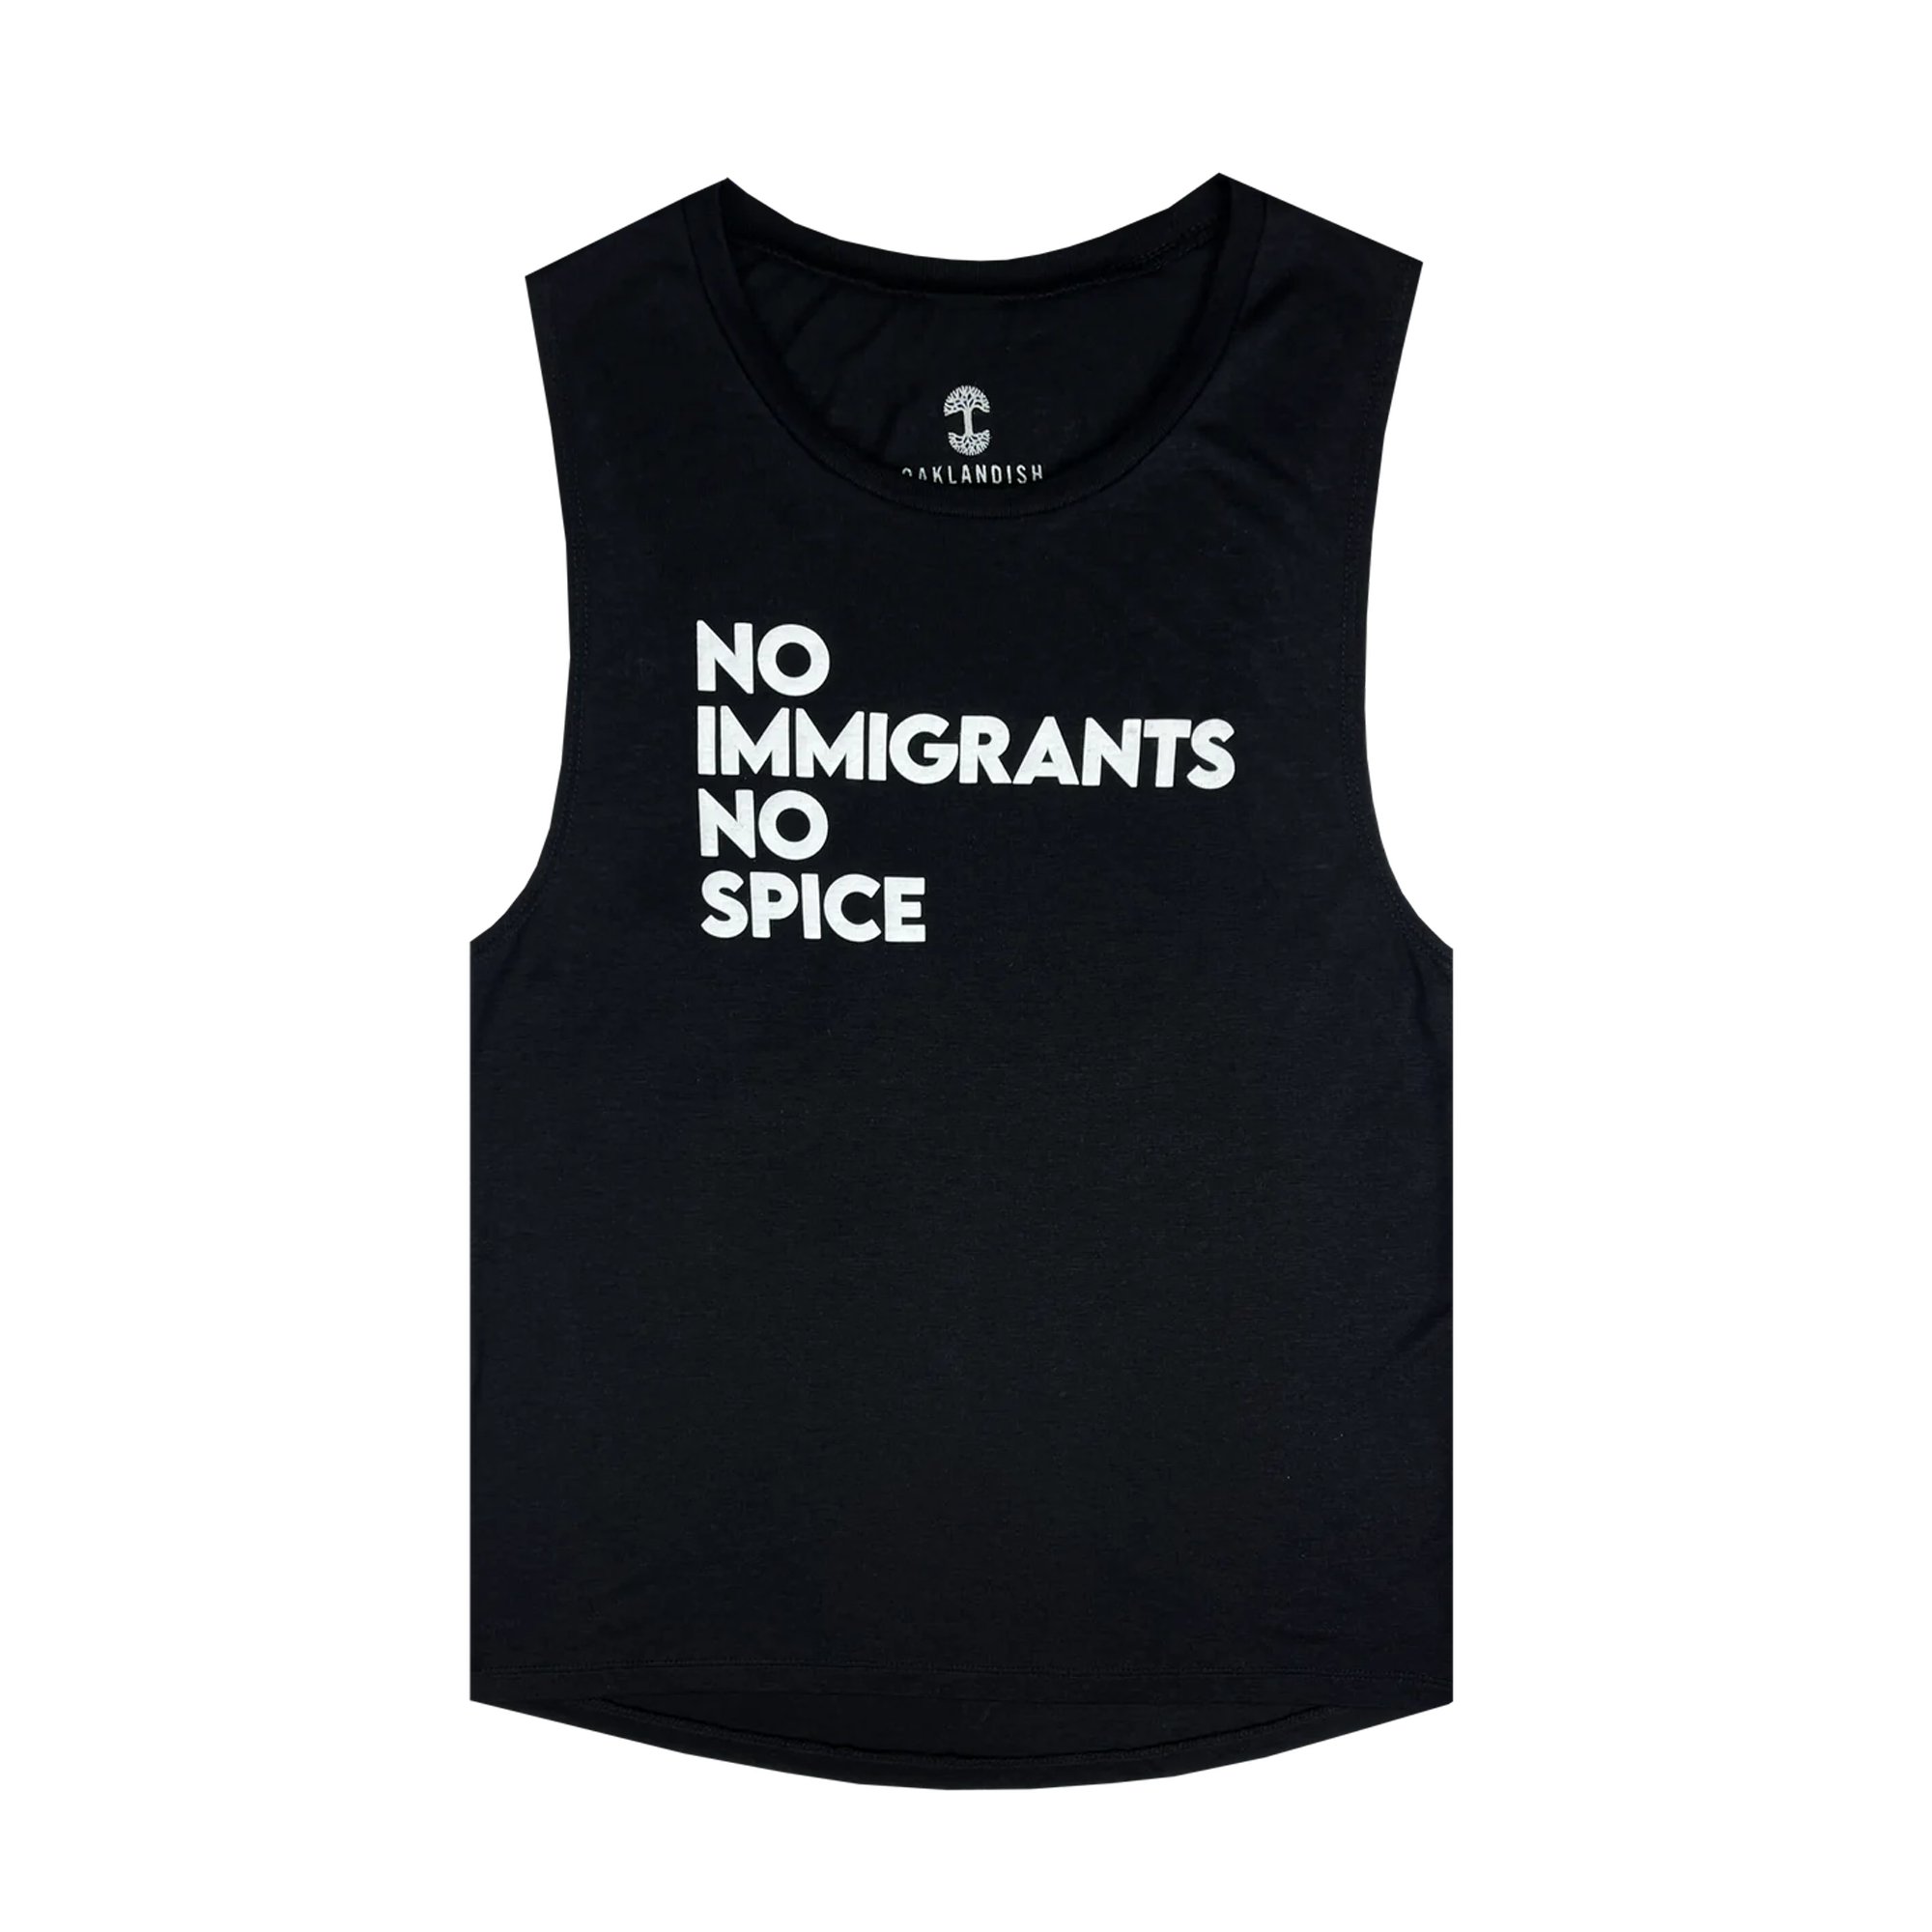 Women's black cotton flowing tank top with white NO IMMIGRANTS NO SPICE wordmark on the front chest.